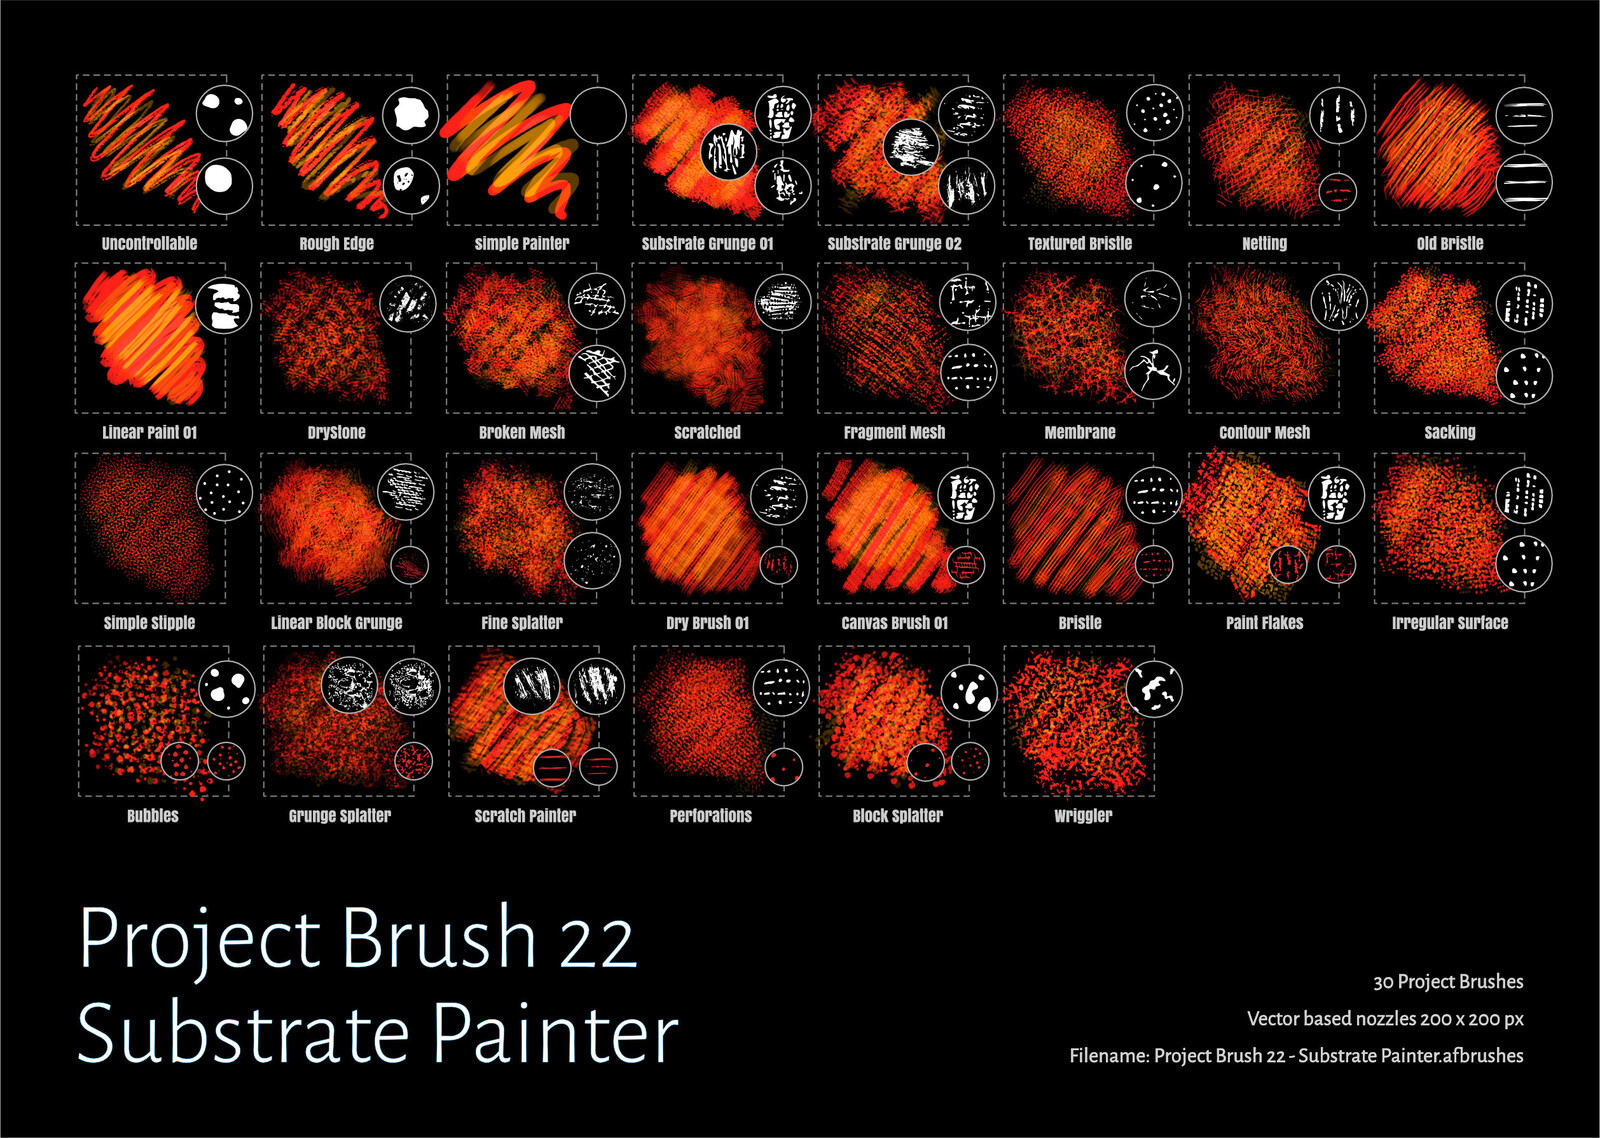 Project Brush 22
Substrate Painter